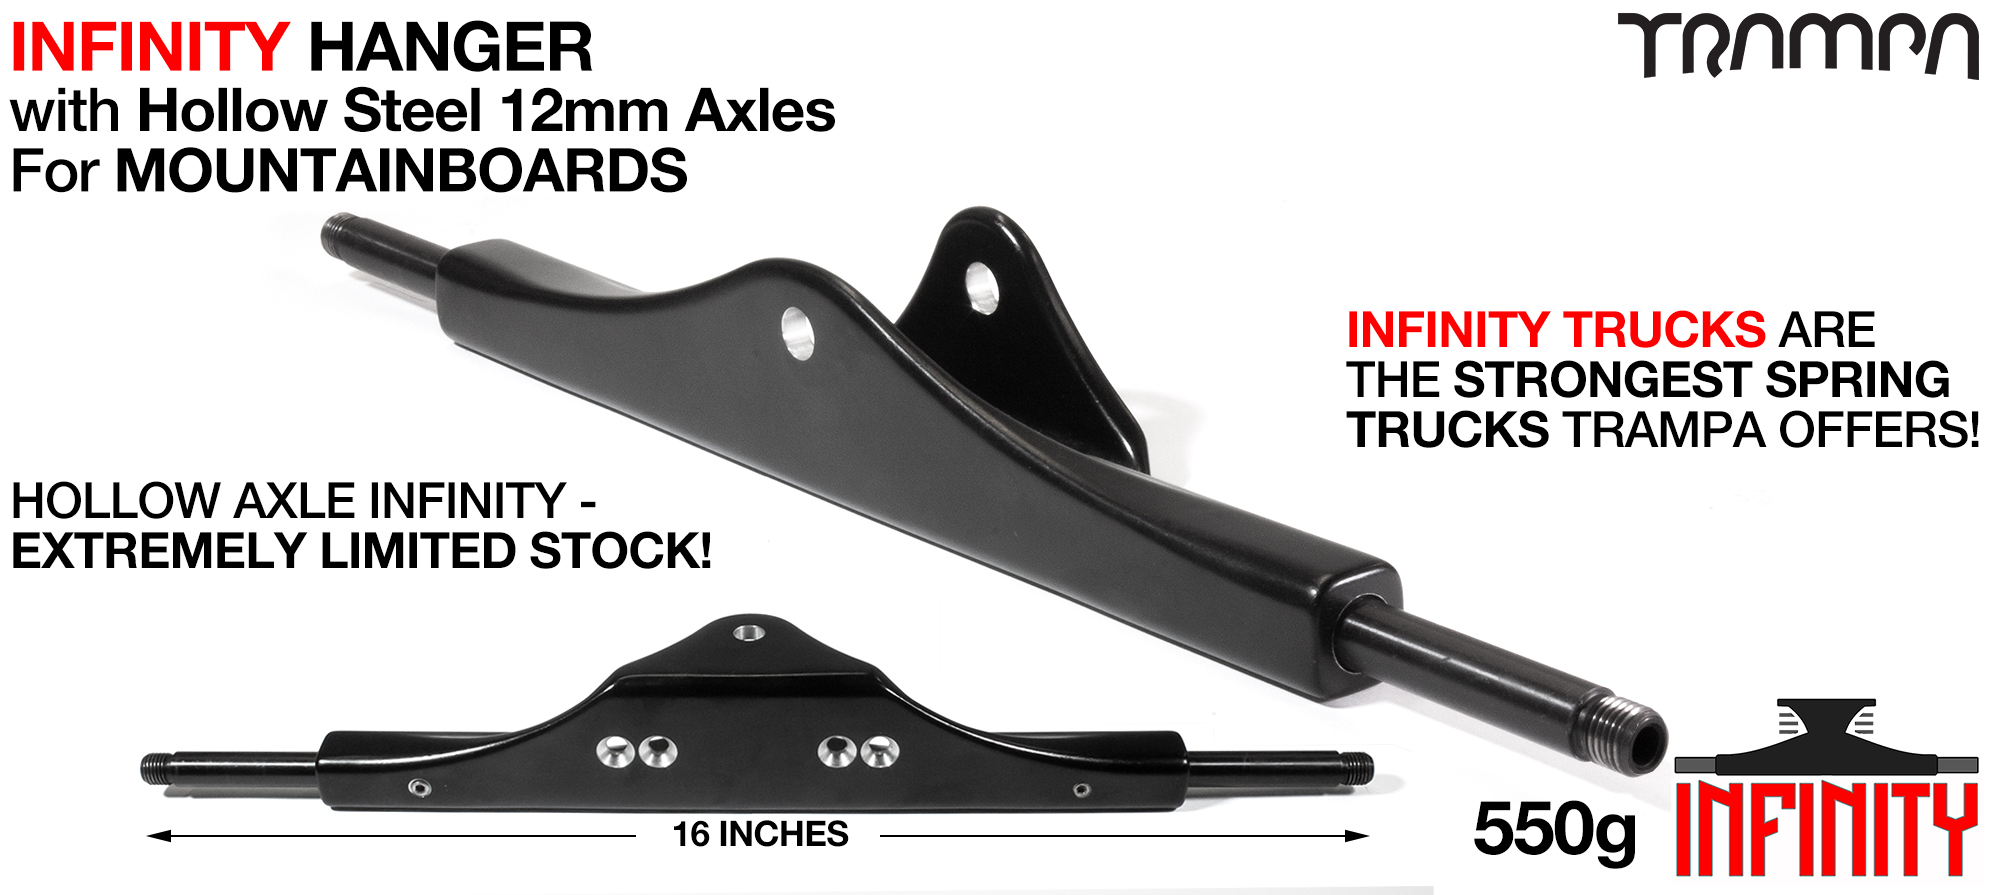 INFINITY ATB Hanger - 12mm HOLLOW Axles Painted Black & CNC'd Kingpin hole  